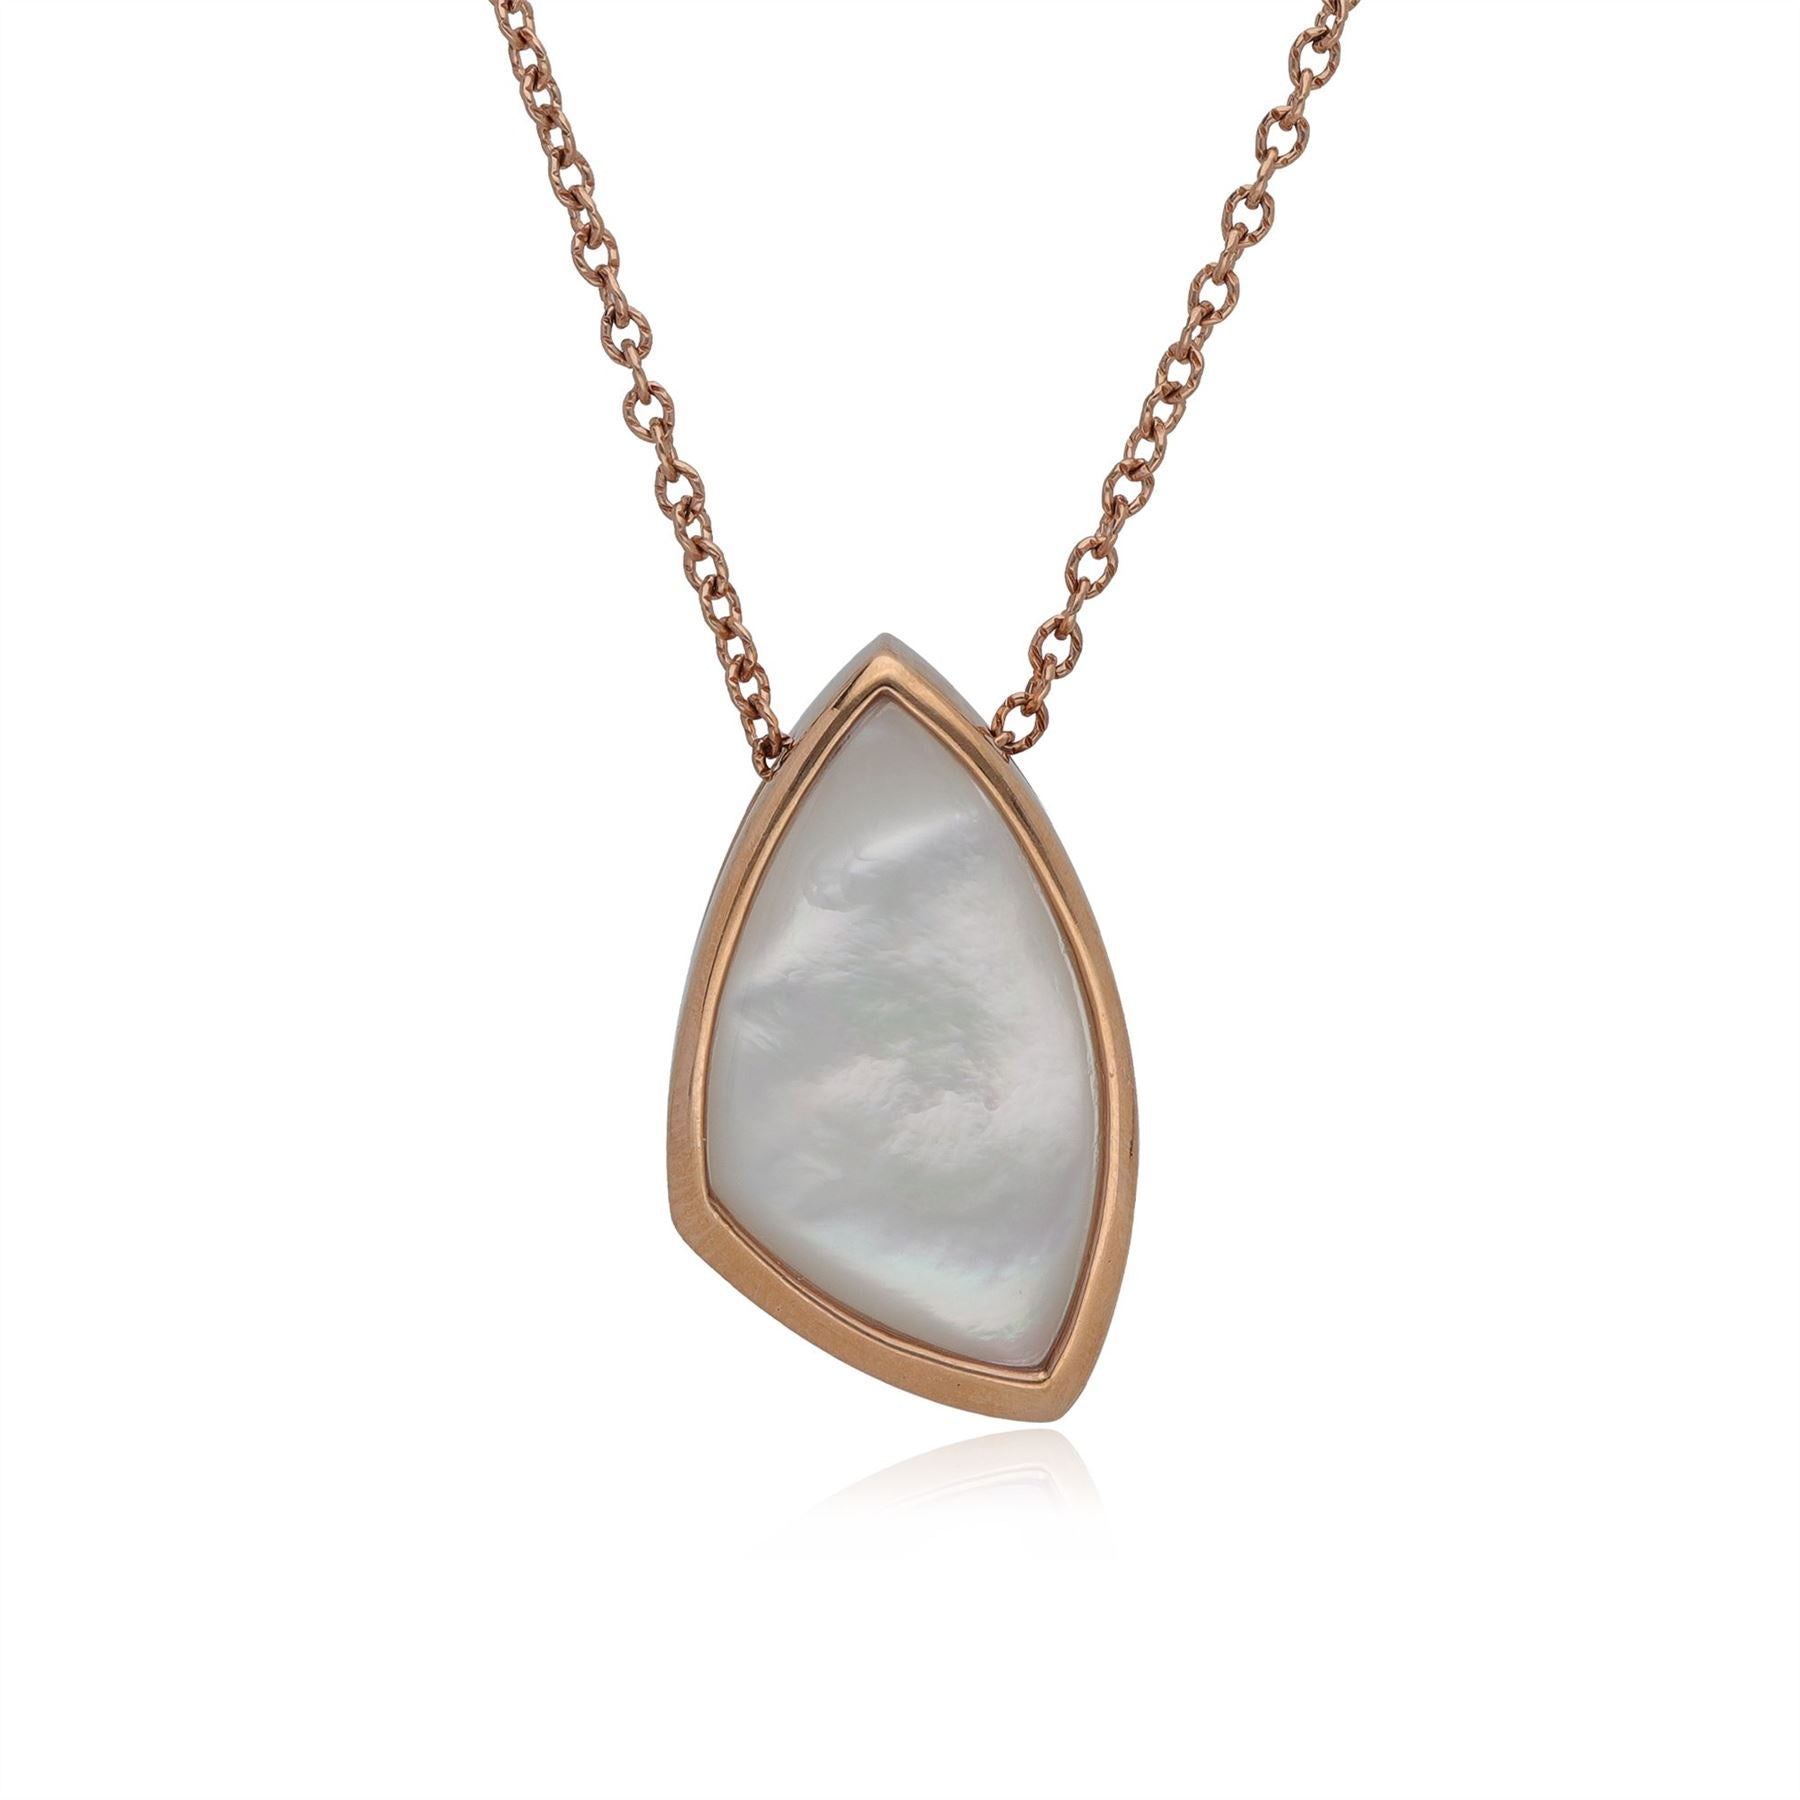 Kosmos Mother of Pearl Angular Necklace in Rose Gold Plated Sterling Silver